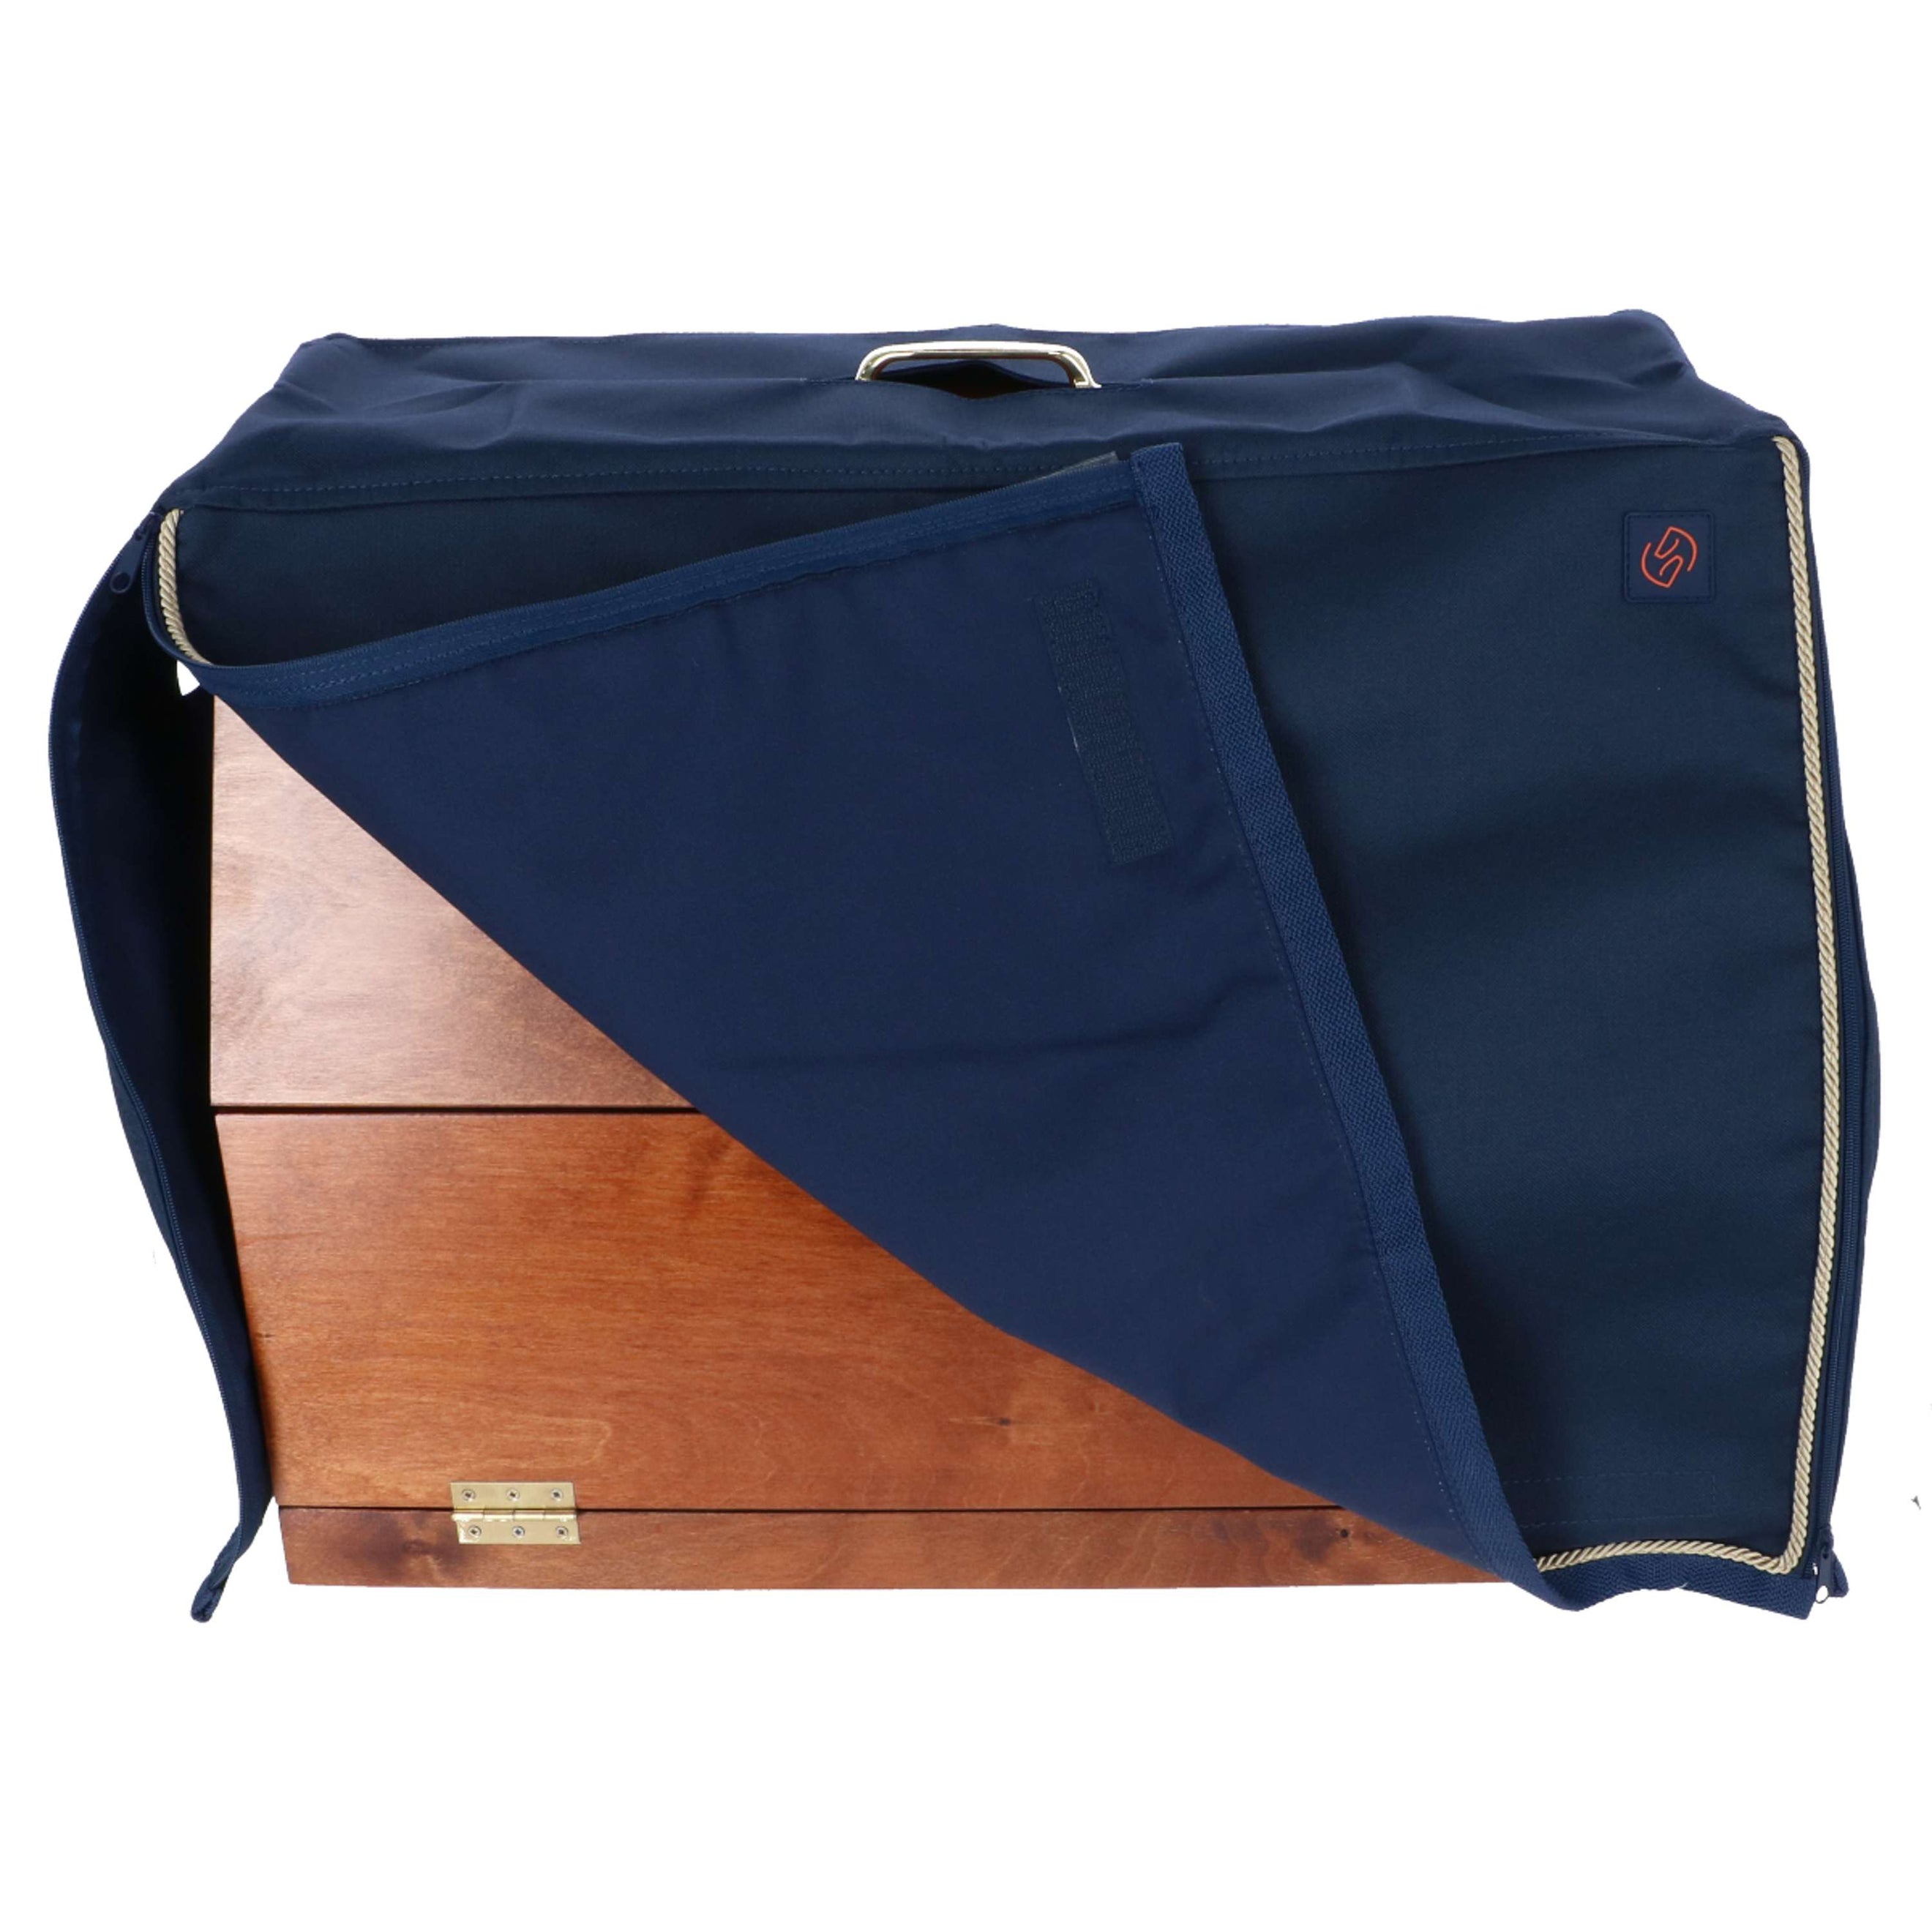 One Equestrian Grooming Box Cover marine/Or